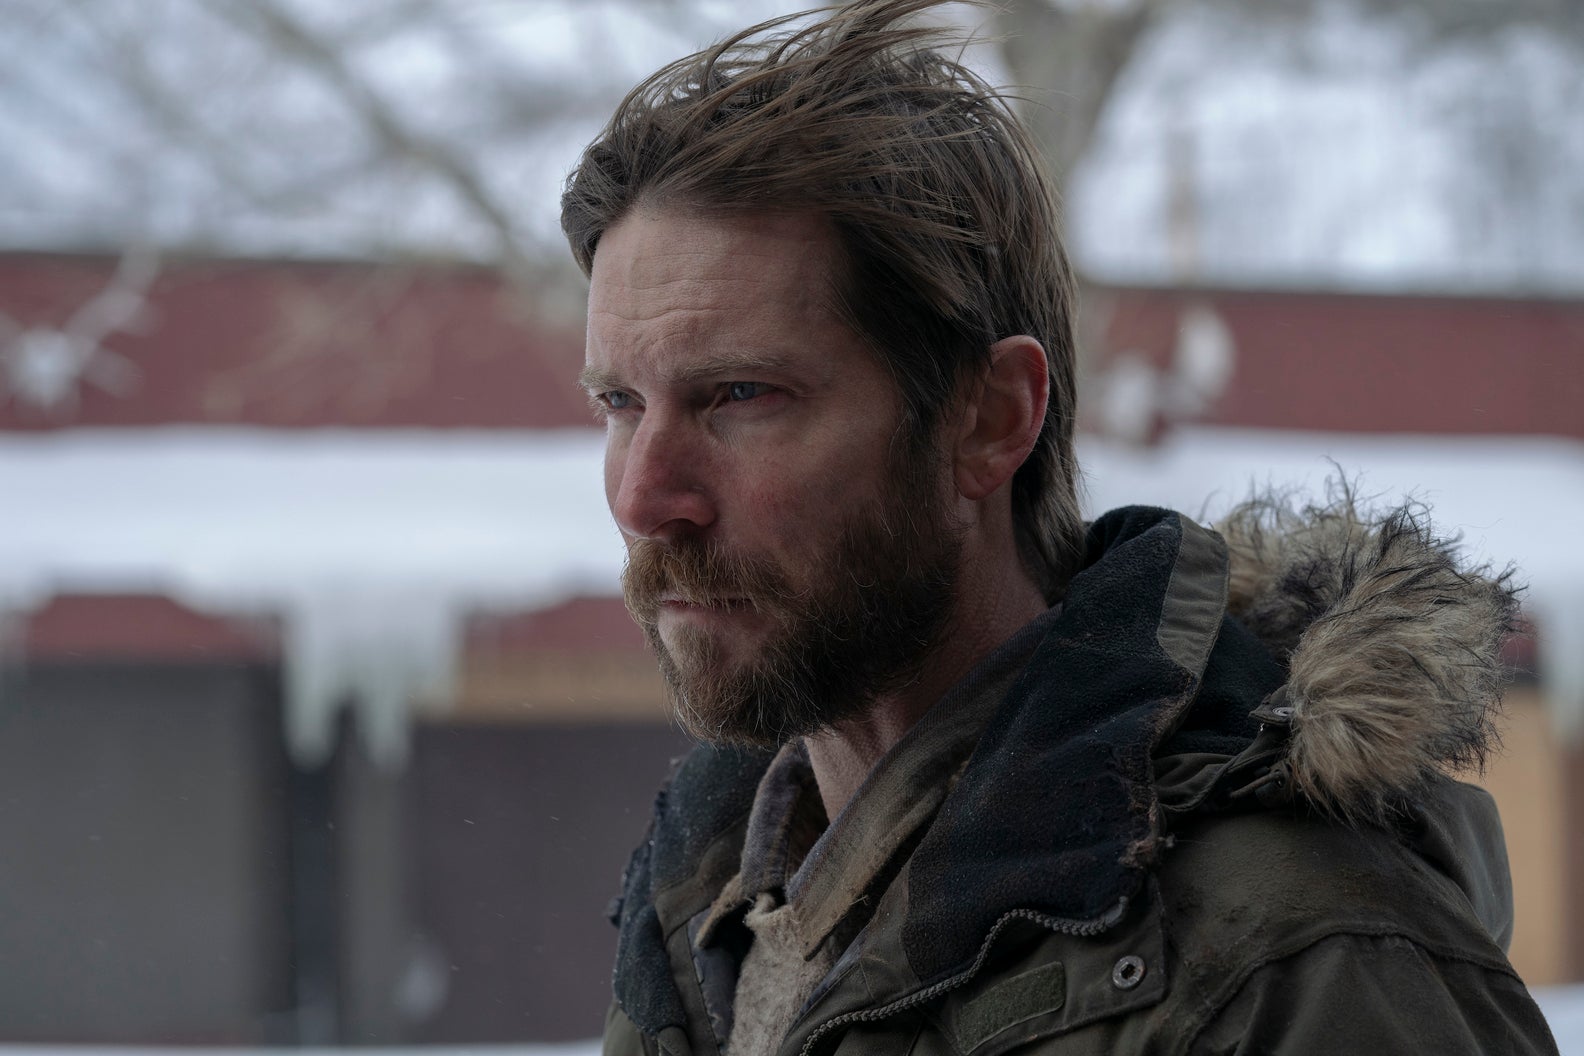 Troy Baker on Watching Pedro Pascal in His 'Last of Us' Role